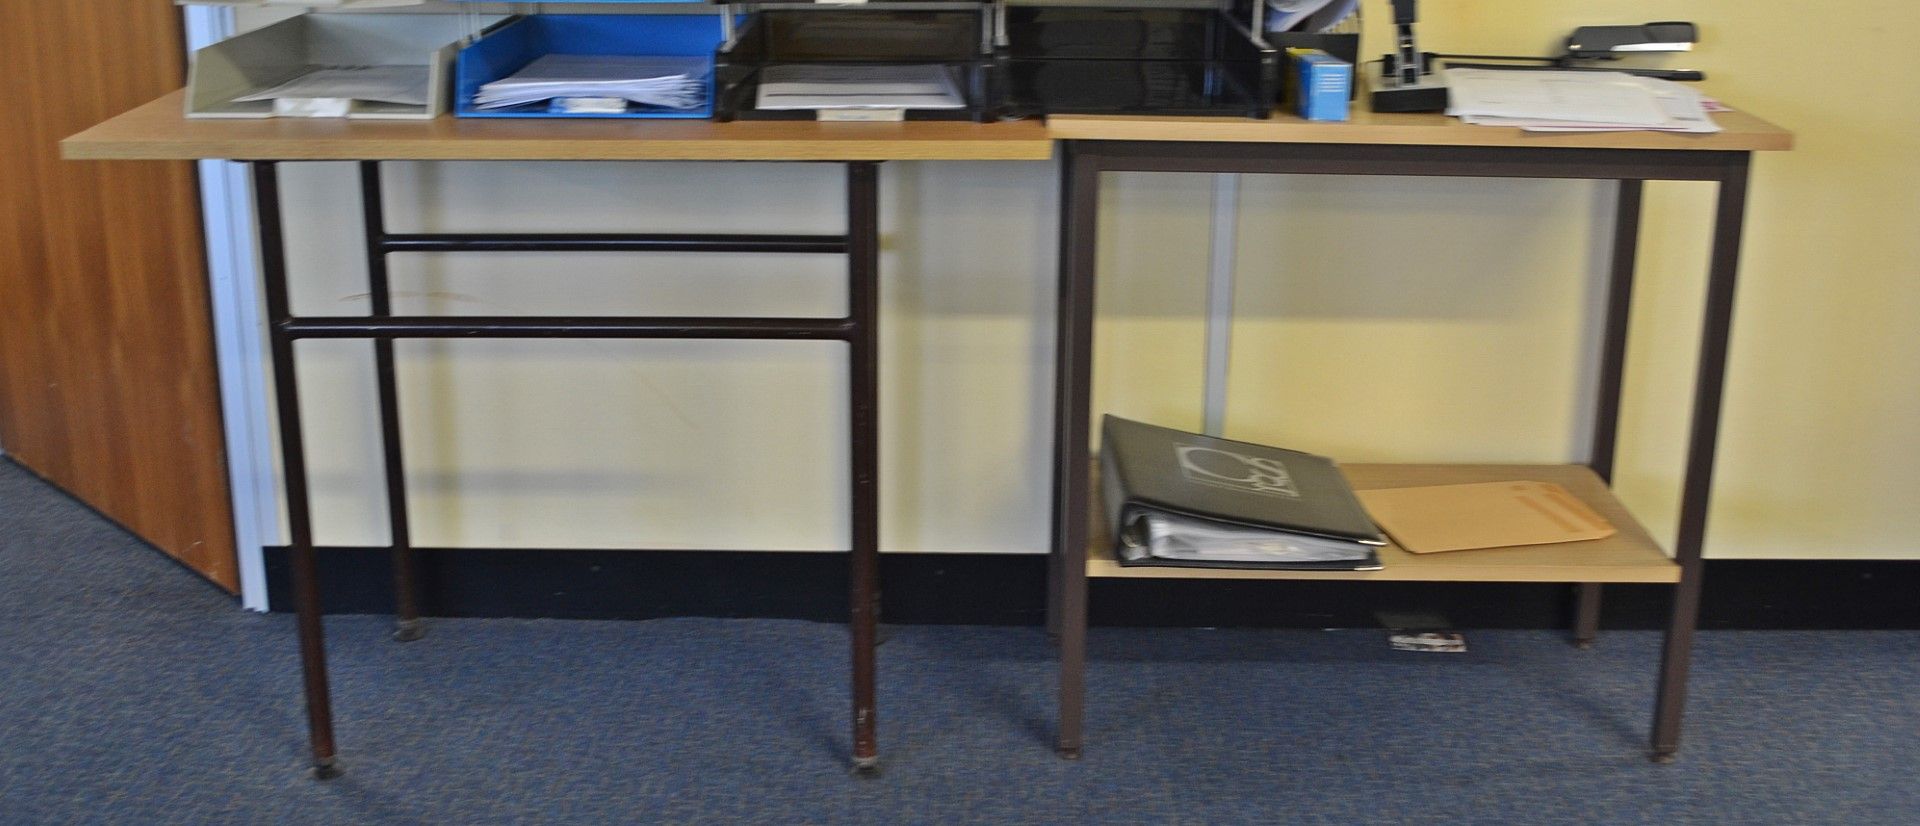 4 x Small Side Office Tables - Ref: VM360, VM363 - CL409 - Location: Wakefield WF16 - Image 5 of 7